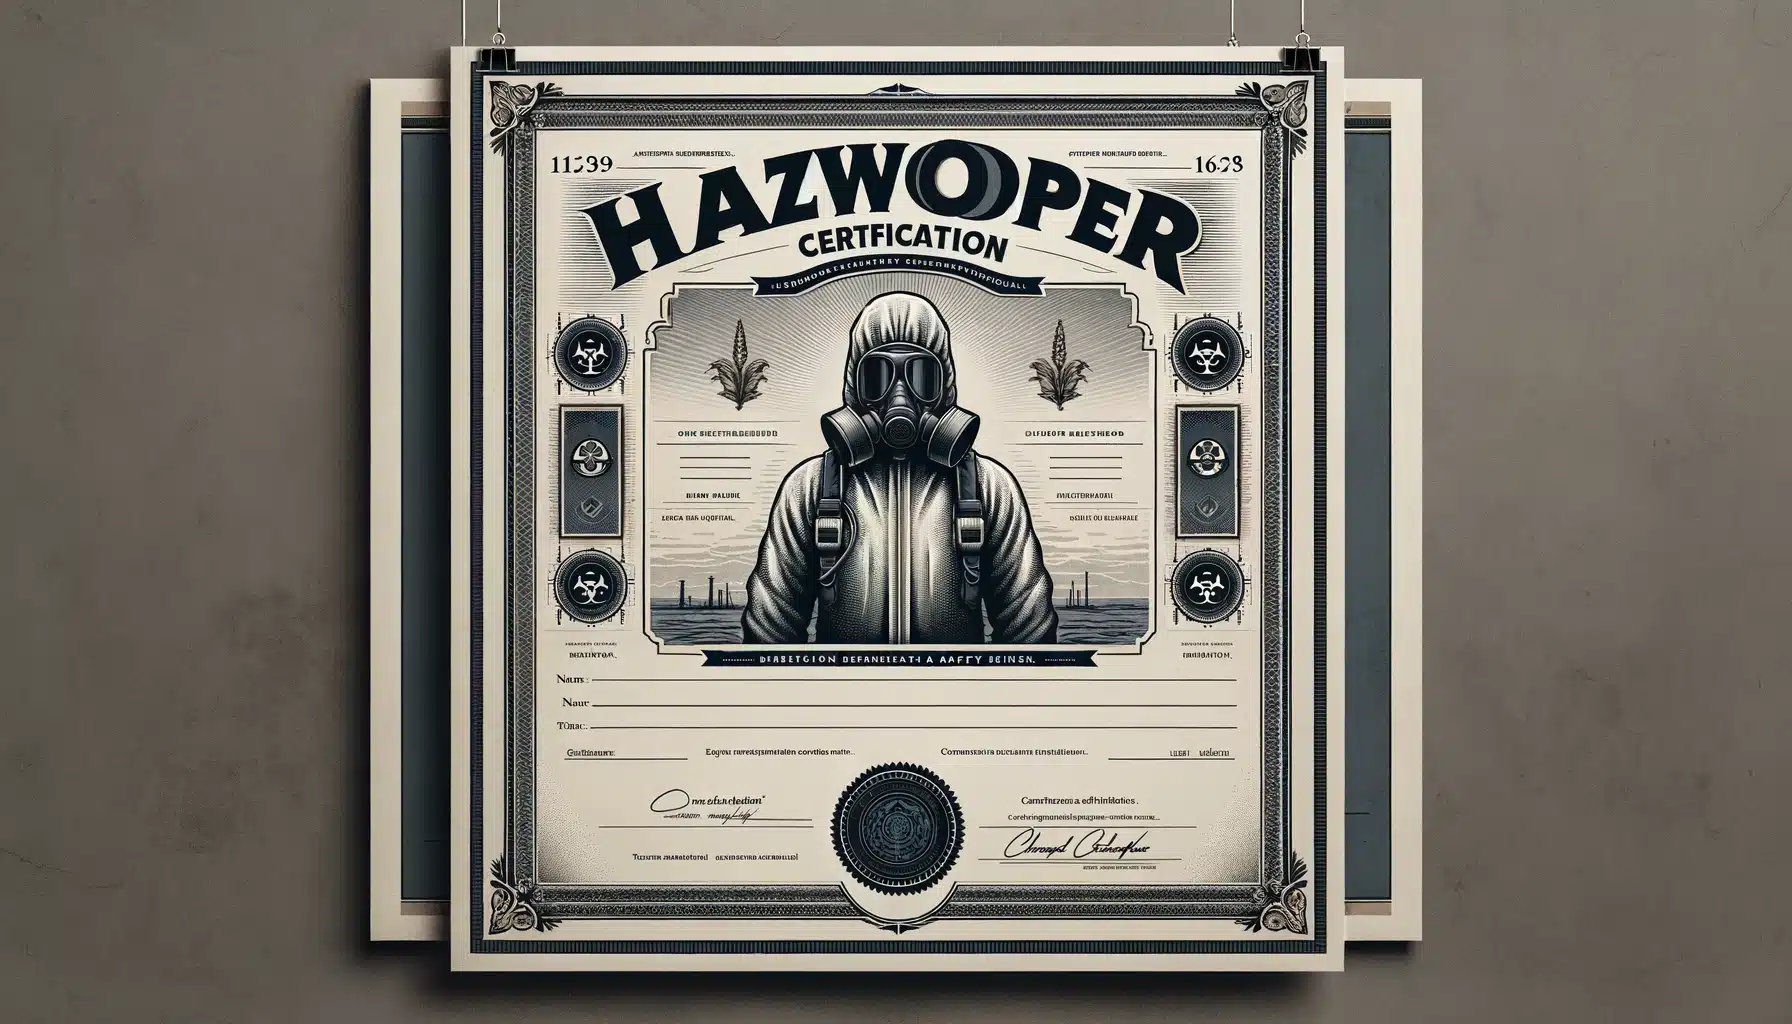 Hazwoper Certificate. Get hazwoper trained today. Hazwoper training course for Site Safety and Health Officers, Field Technicians, and construction crews.